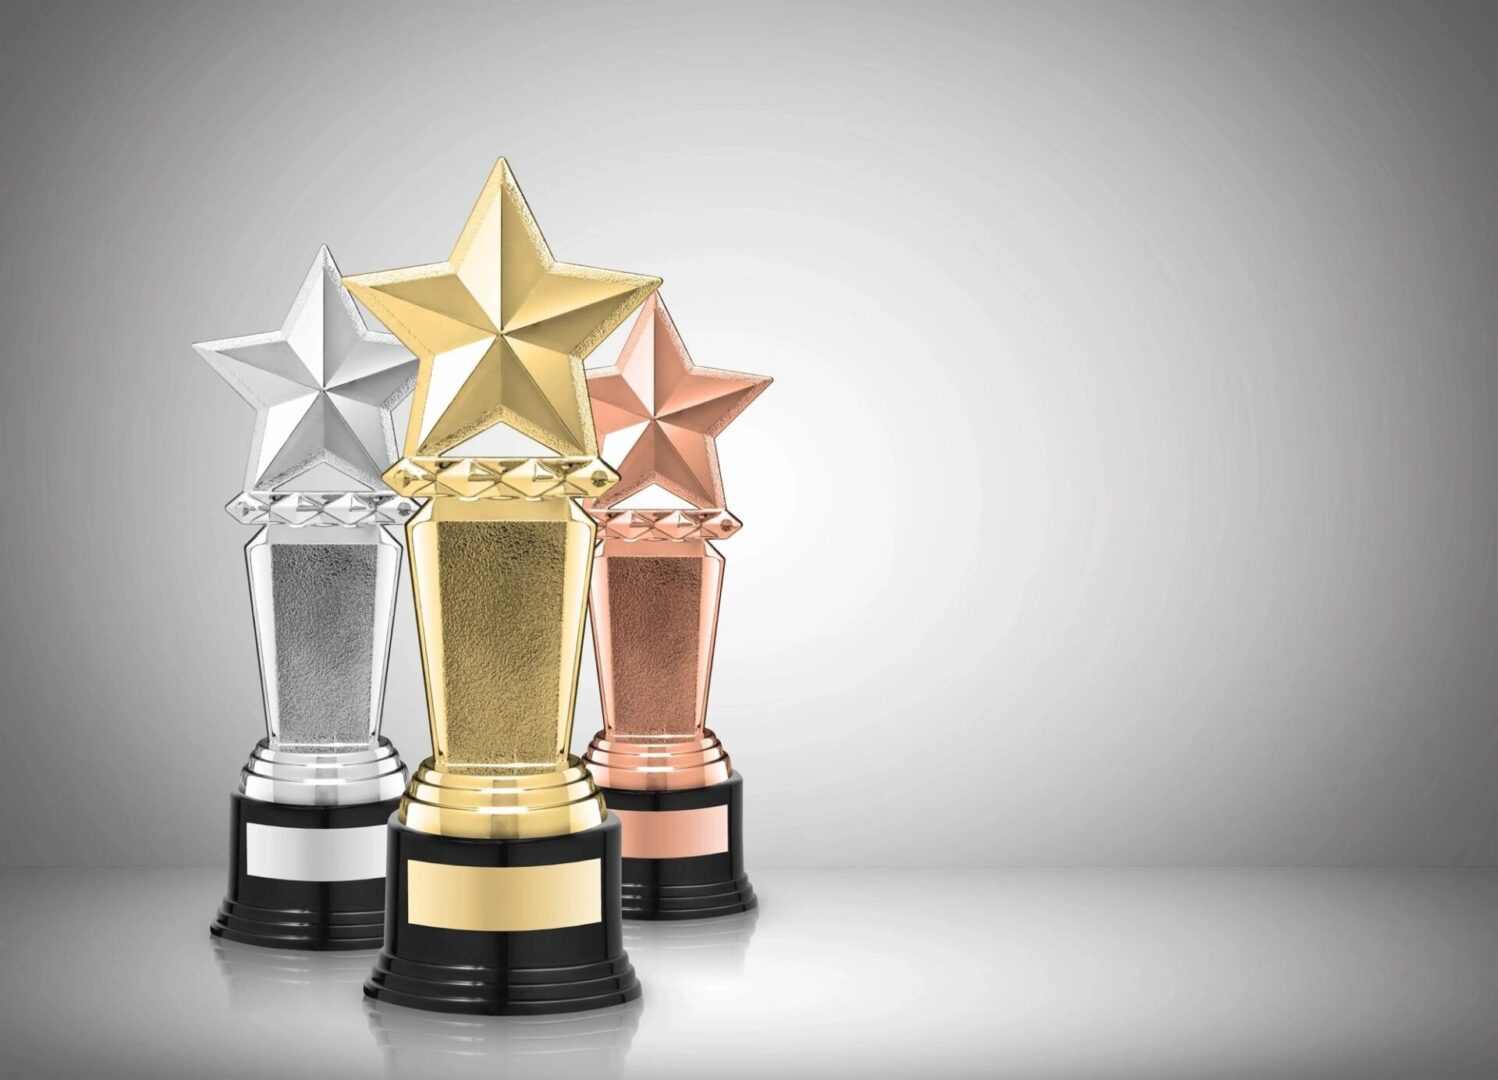 Three awards are shown with a star on top.